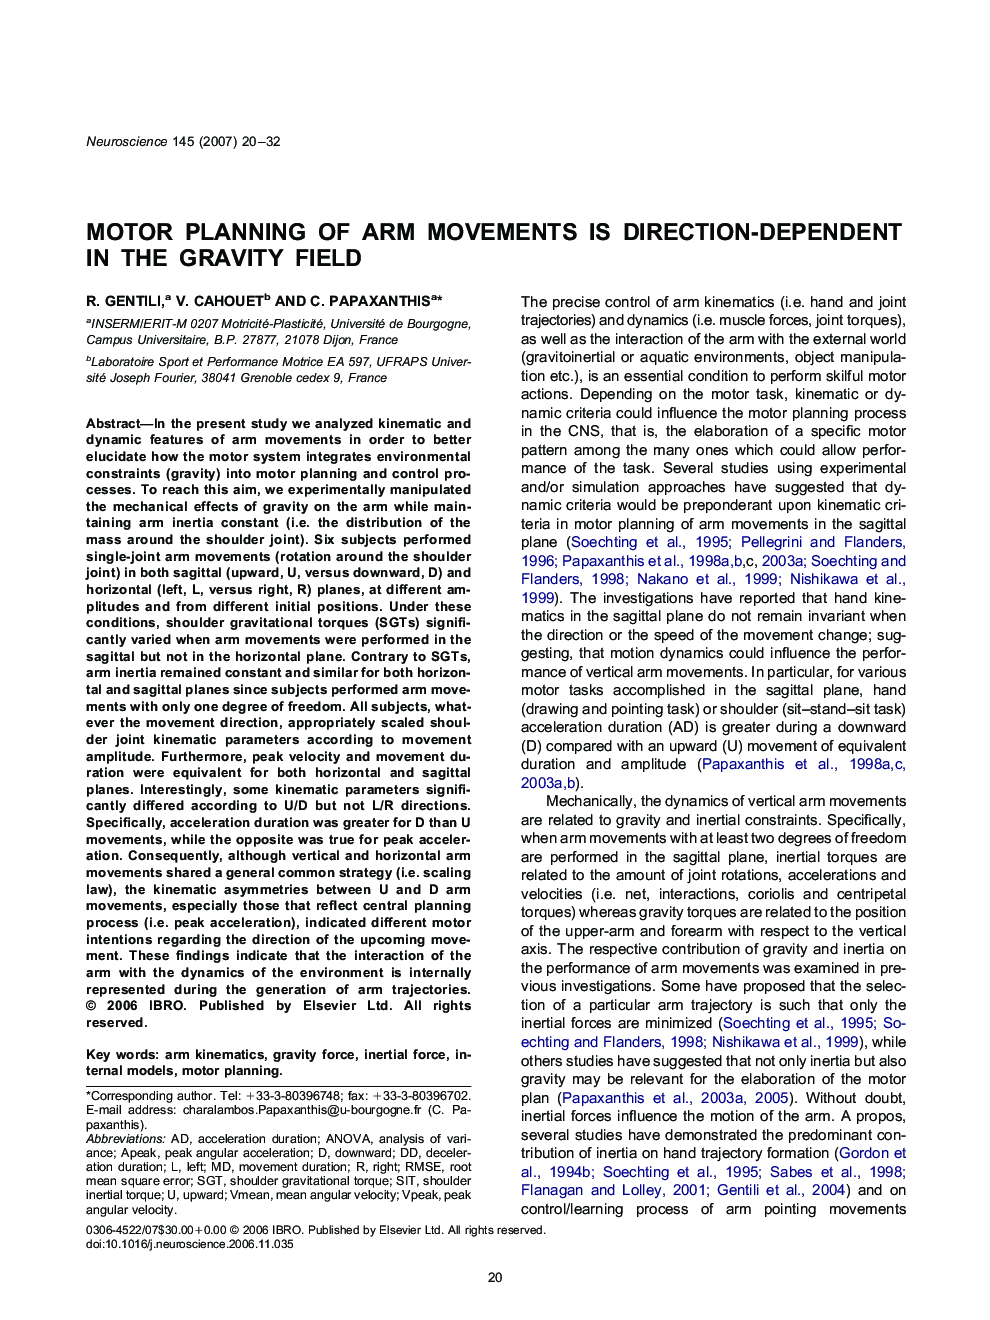 Motor planning of arm movements is direction-dependent in the gravity field